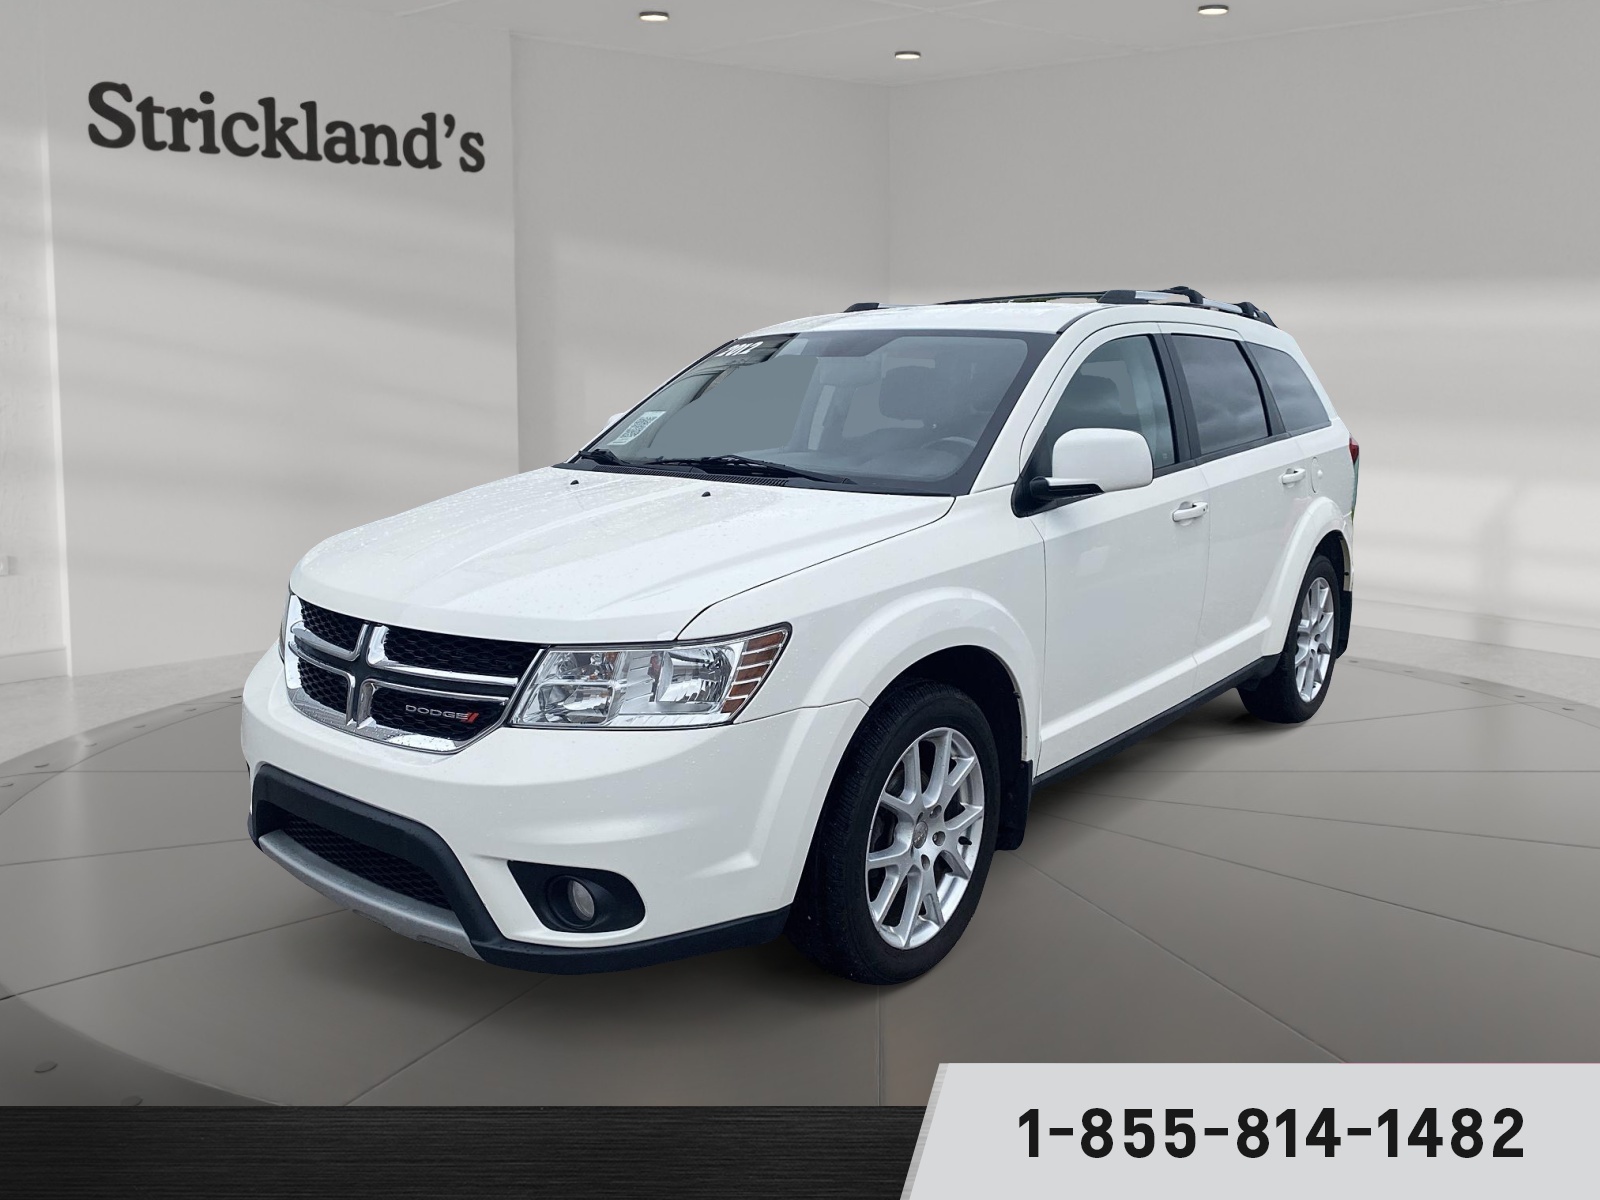 Used 2012 Dodge JOURNEY For Sale